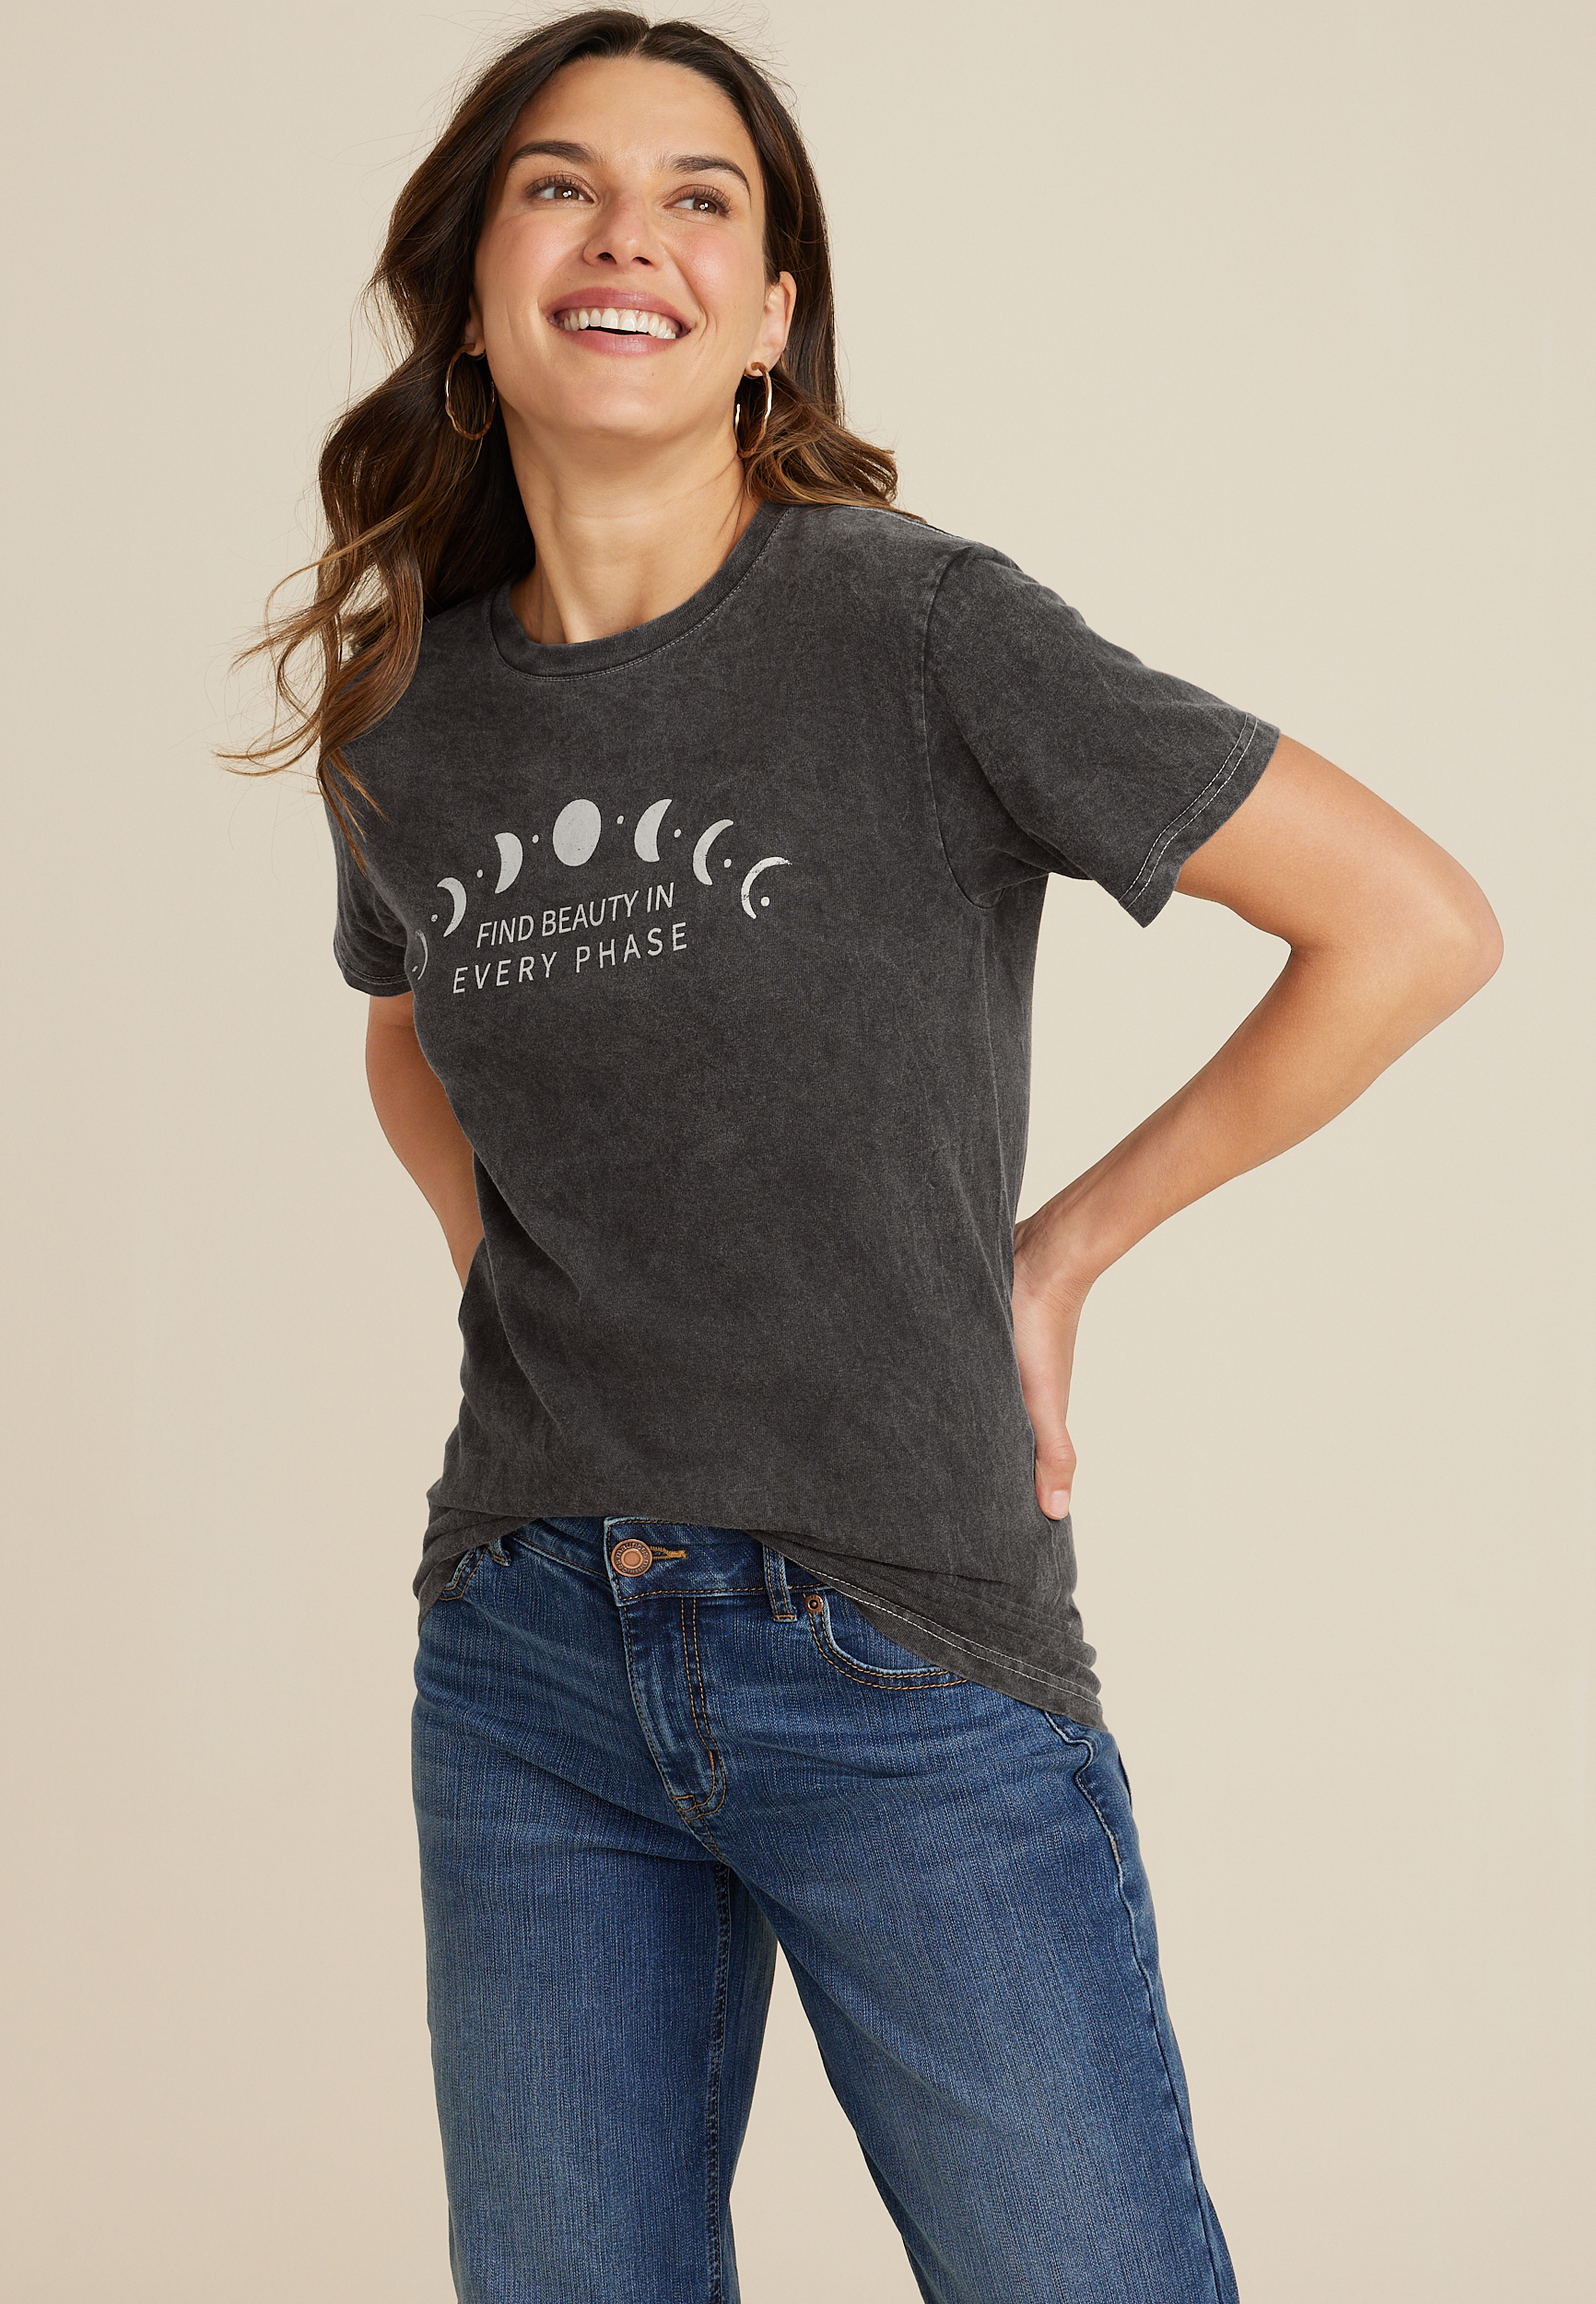 Find Beauty In Every Phase Graphic Tee | maurices